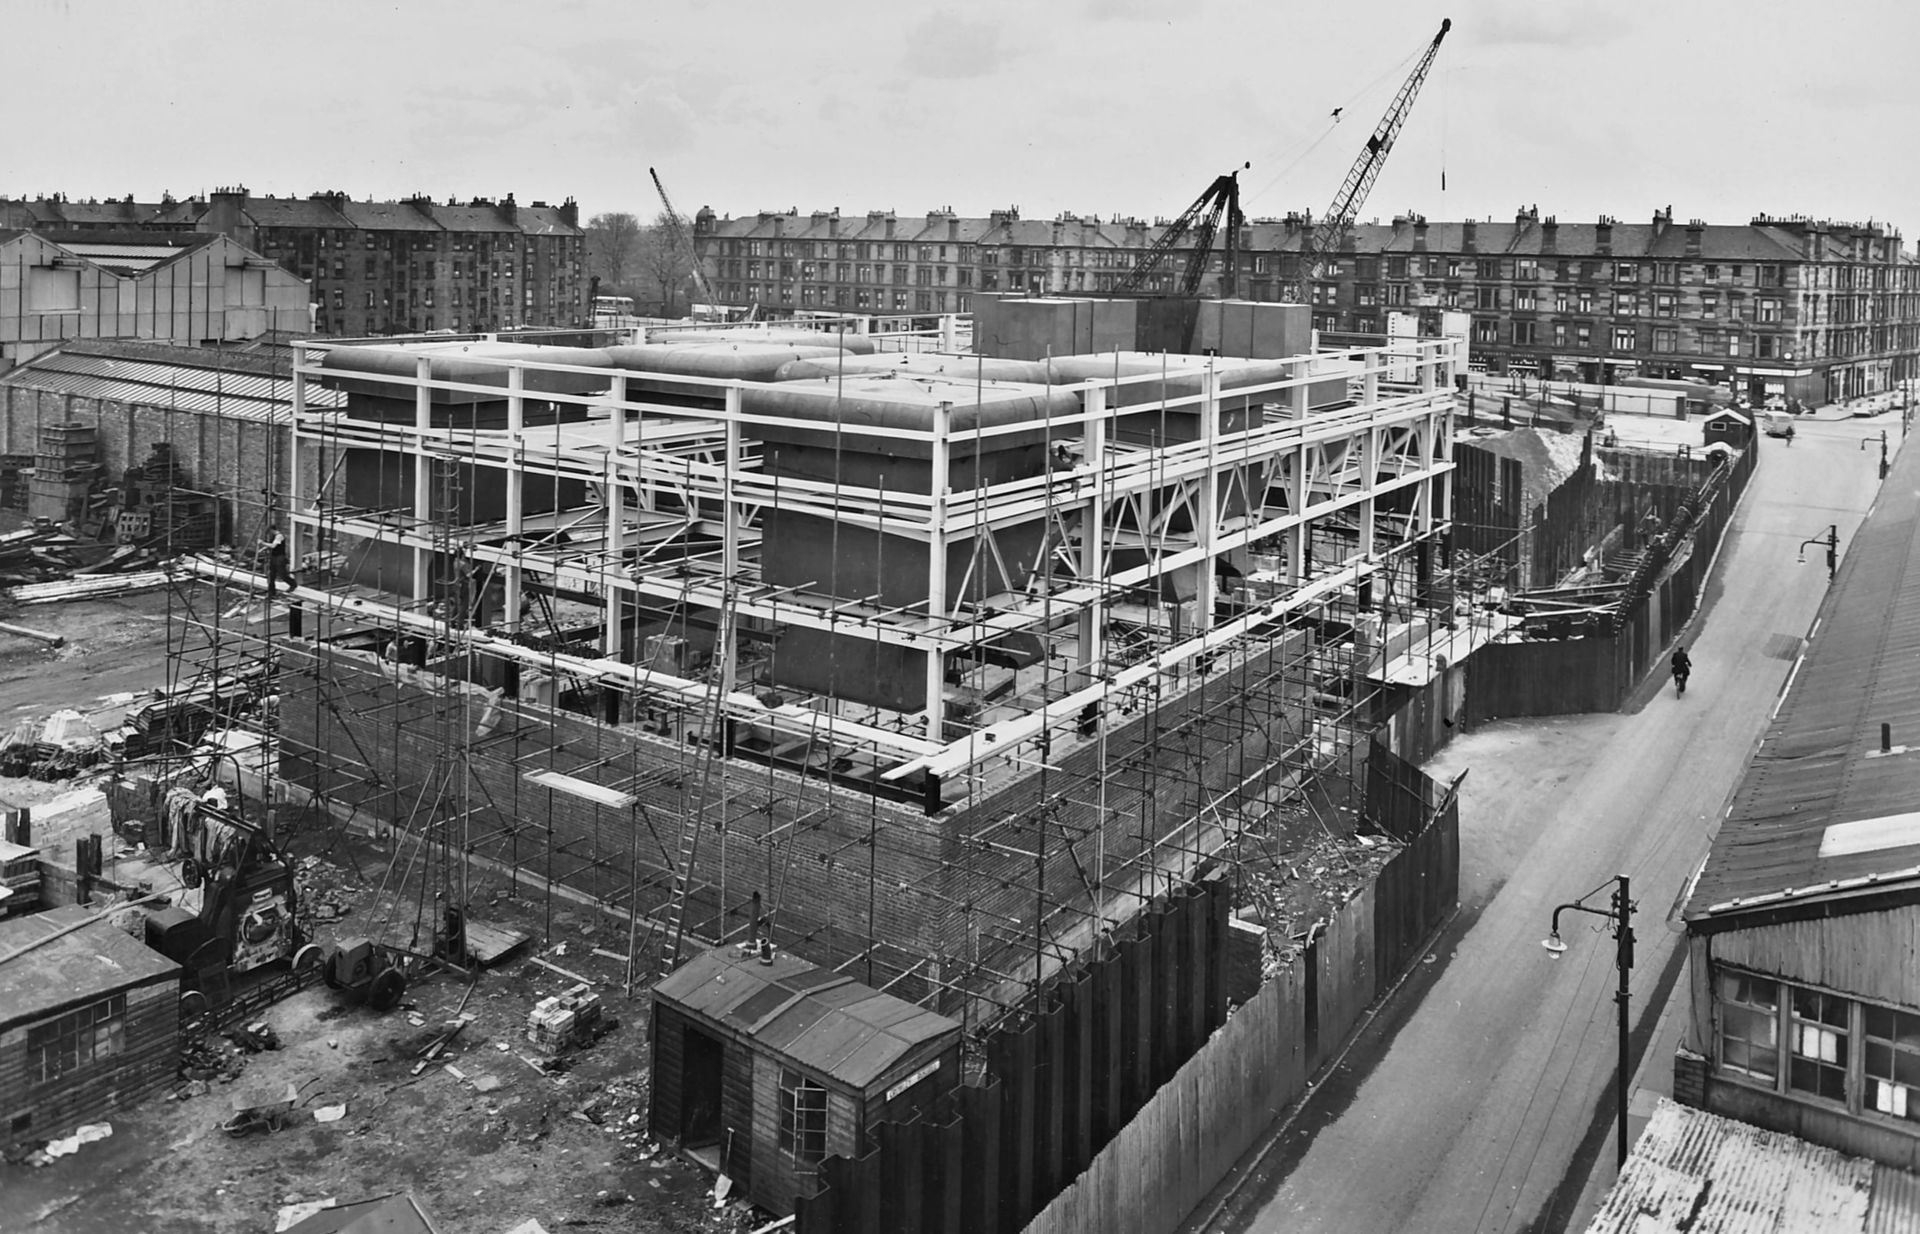 Clyde Tunnel - Construction of South Ventilation Building (May 1962)